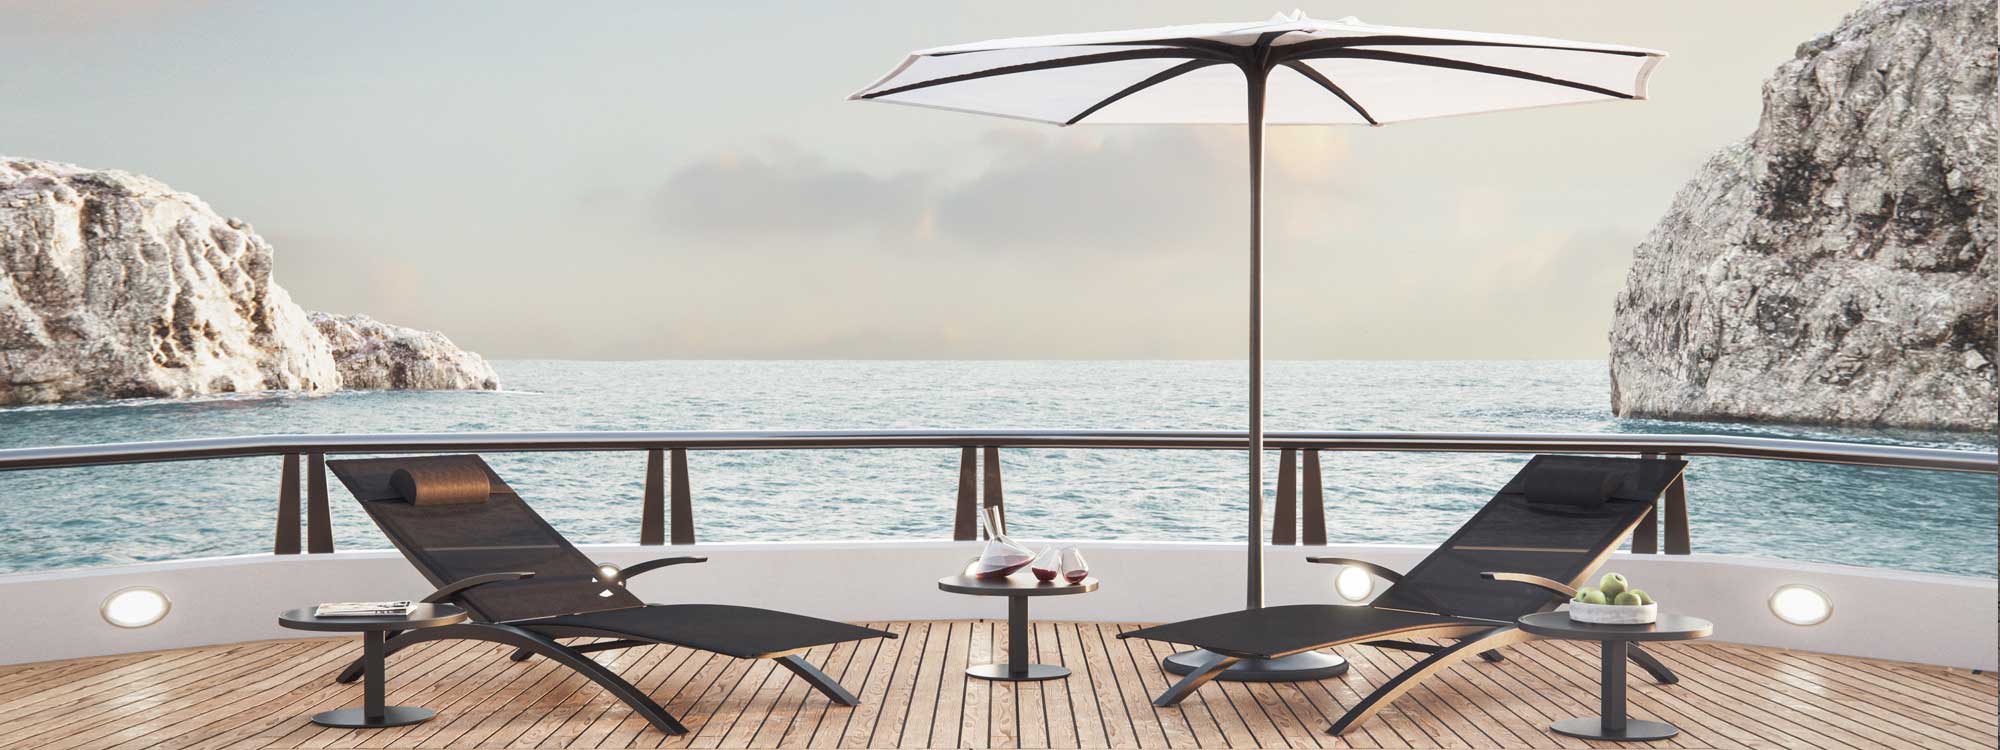 Photo showing O-Zon 50 side table and sun loungers on aft deck of superyacht